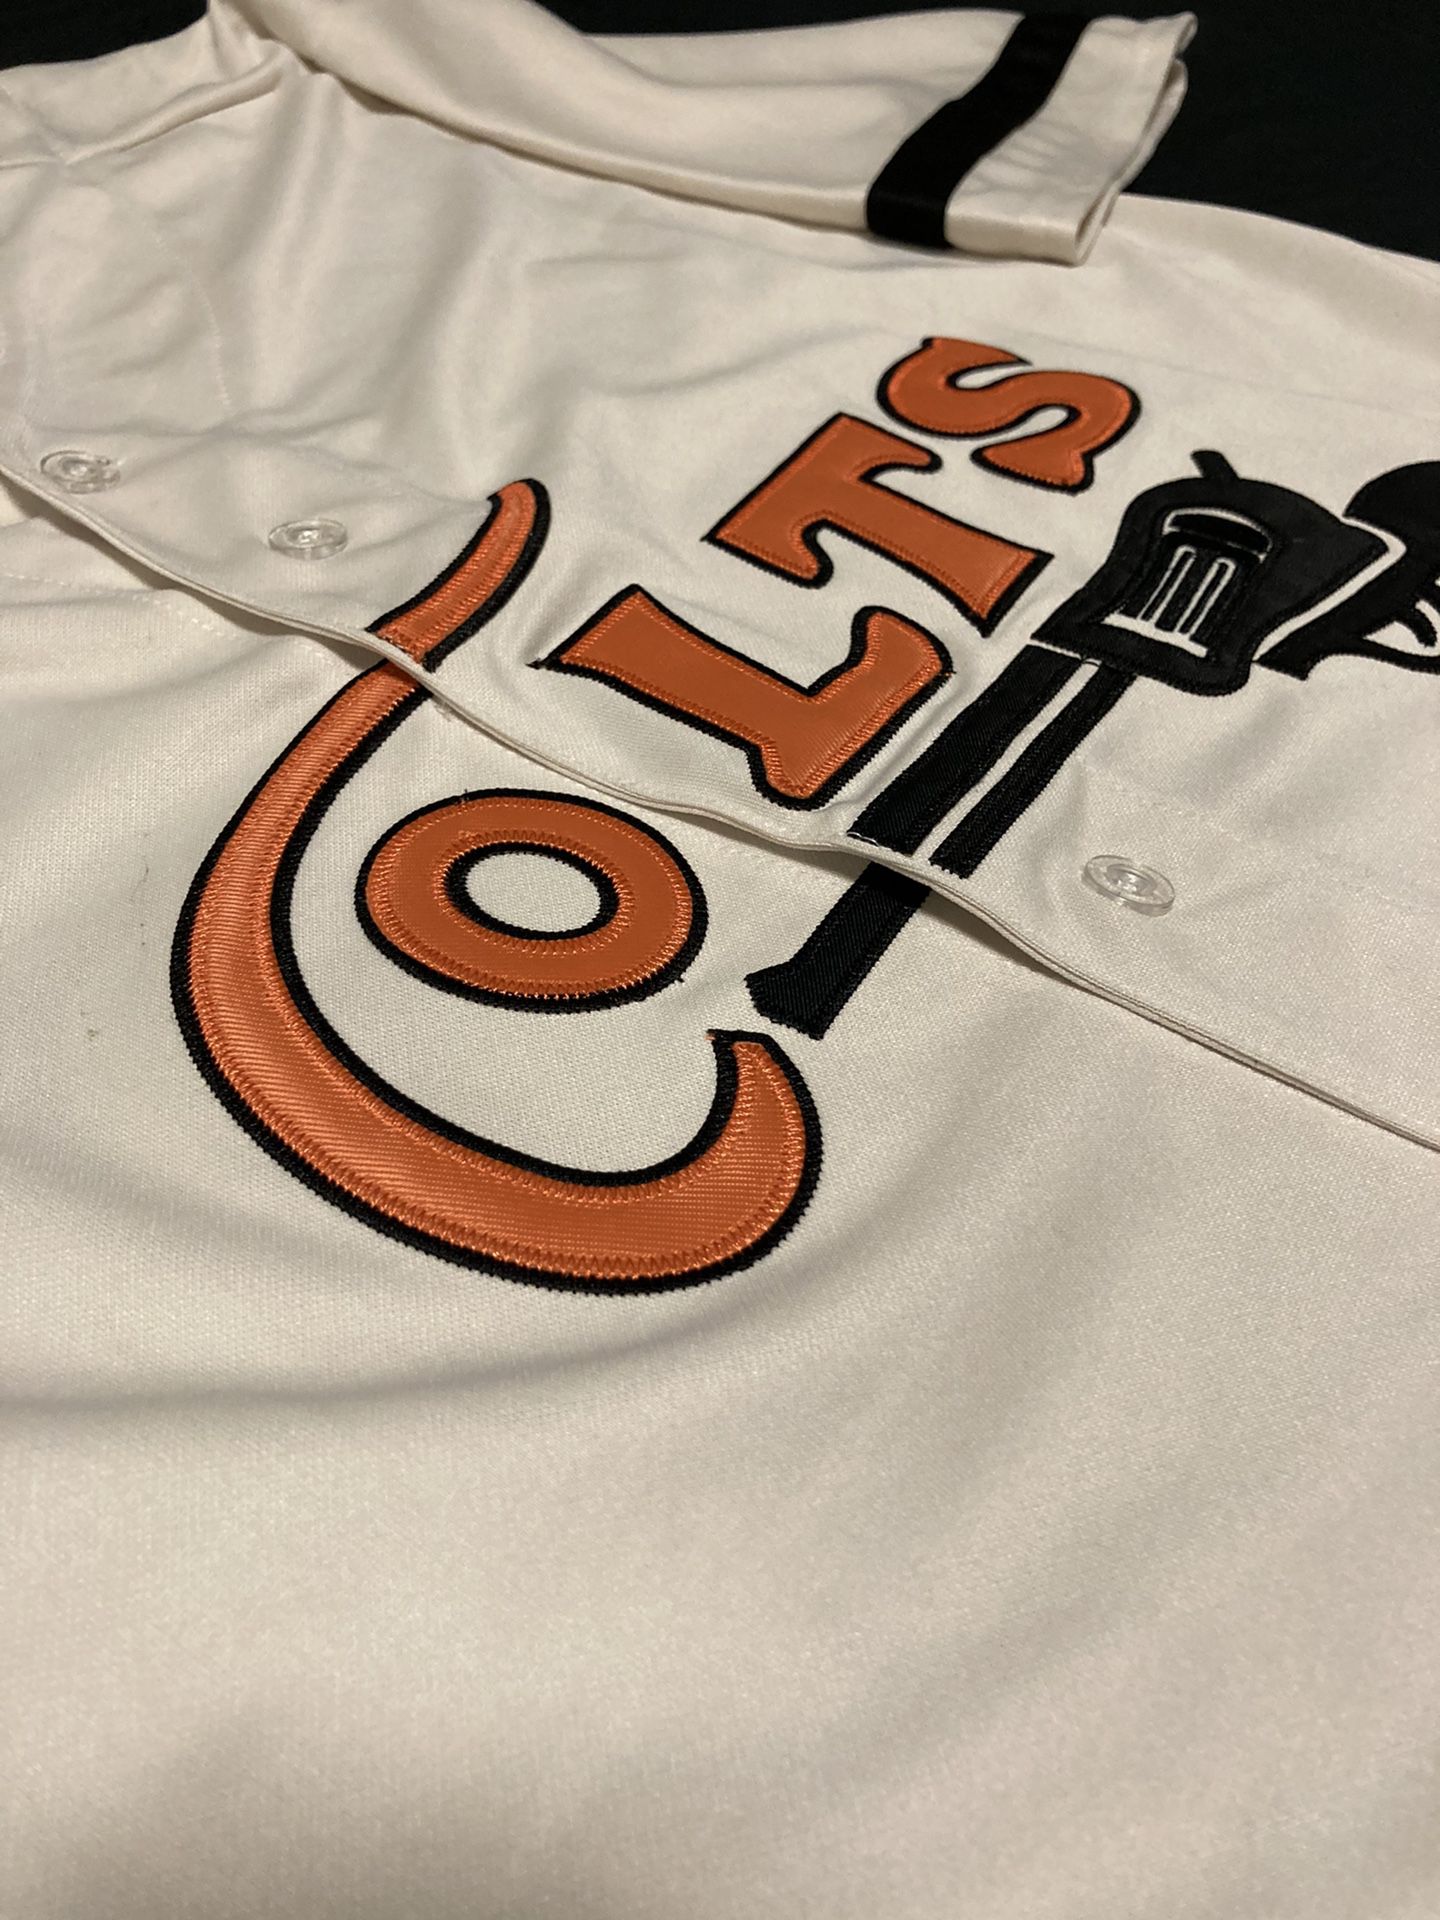 Astros to bring backs Colt .45s jersey this season - Ballpark Digest